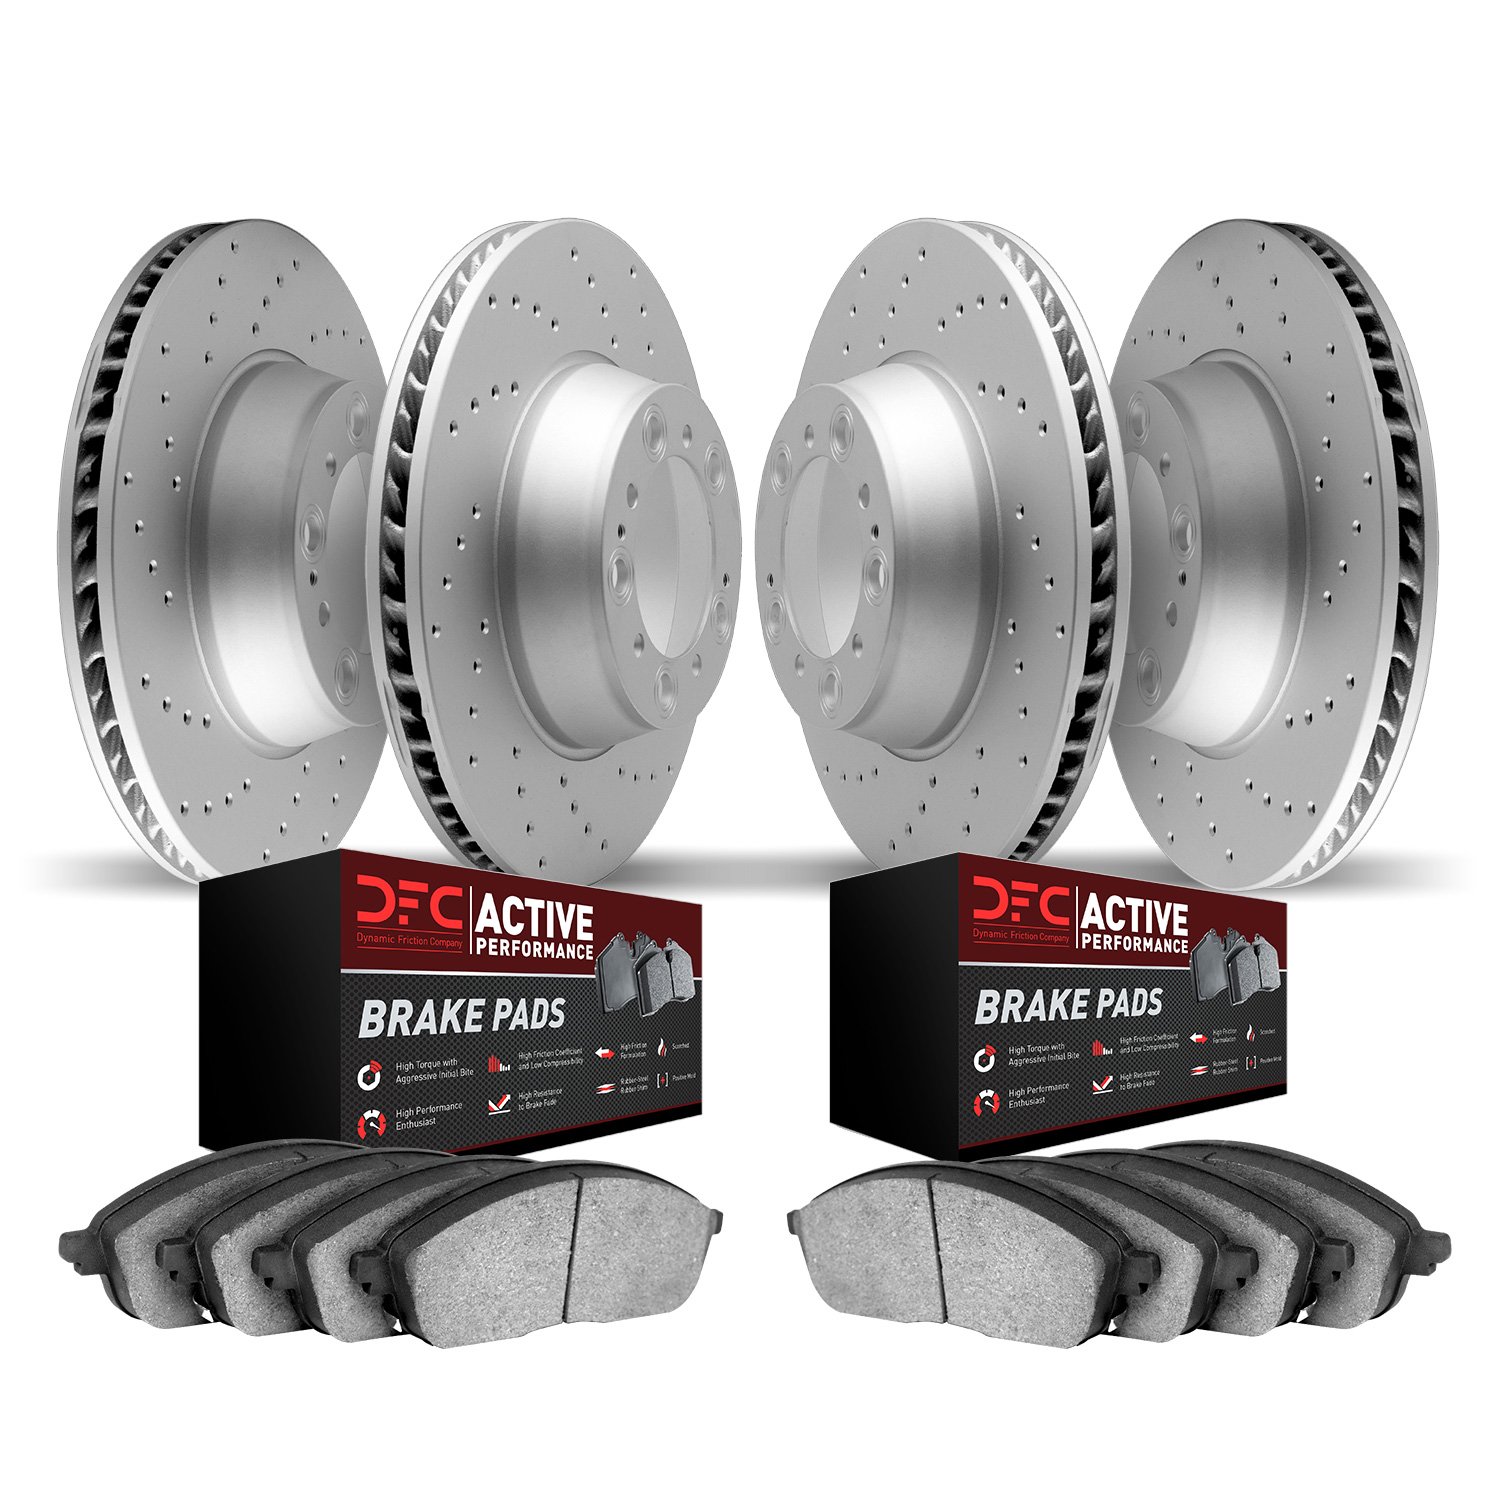 2704-73000 Geoperformance Drilled Brake Rotors with Active Performance Pads Kit, 2004-2009 Audi/Volkswagen, Position: Front and